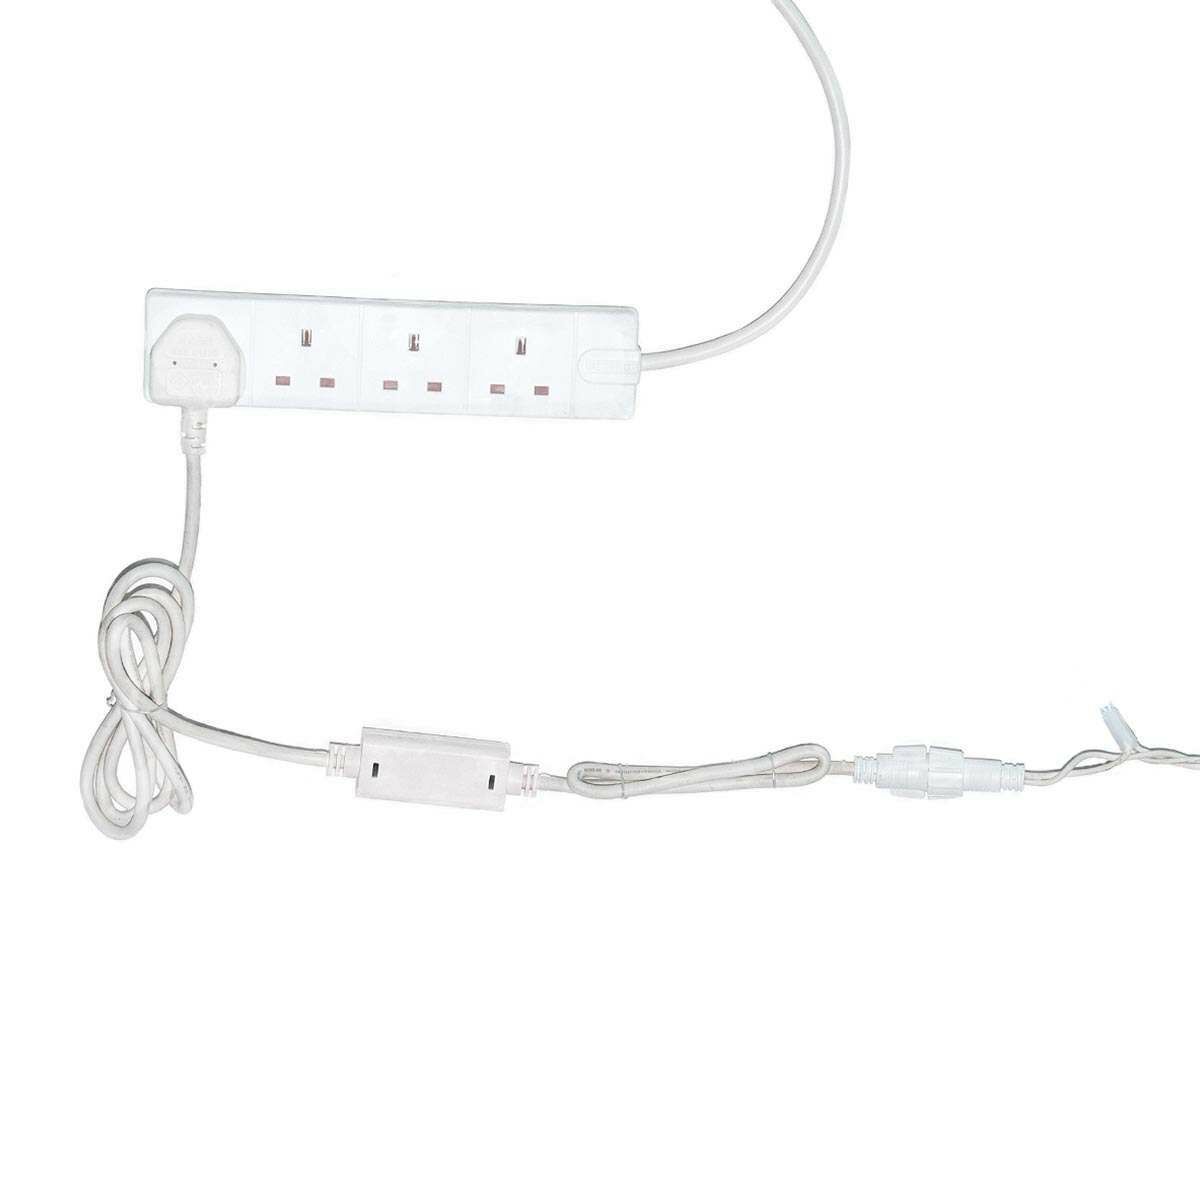 ConnectPro 2m White Starter Cable - Powers up to 7600 LEDs image 2